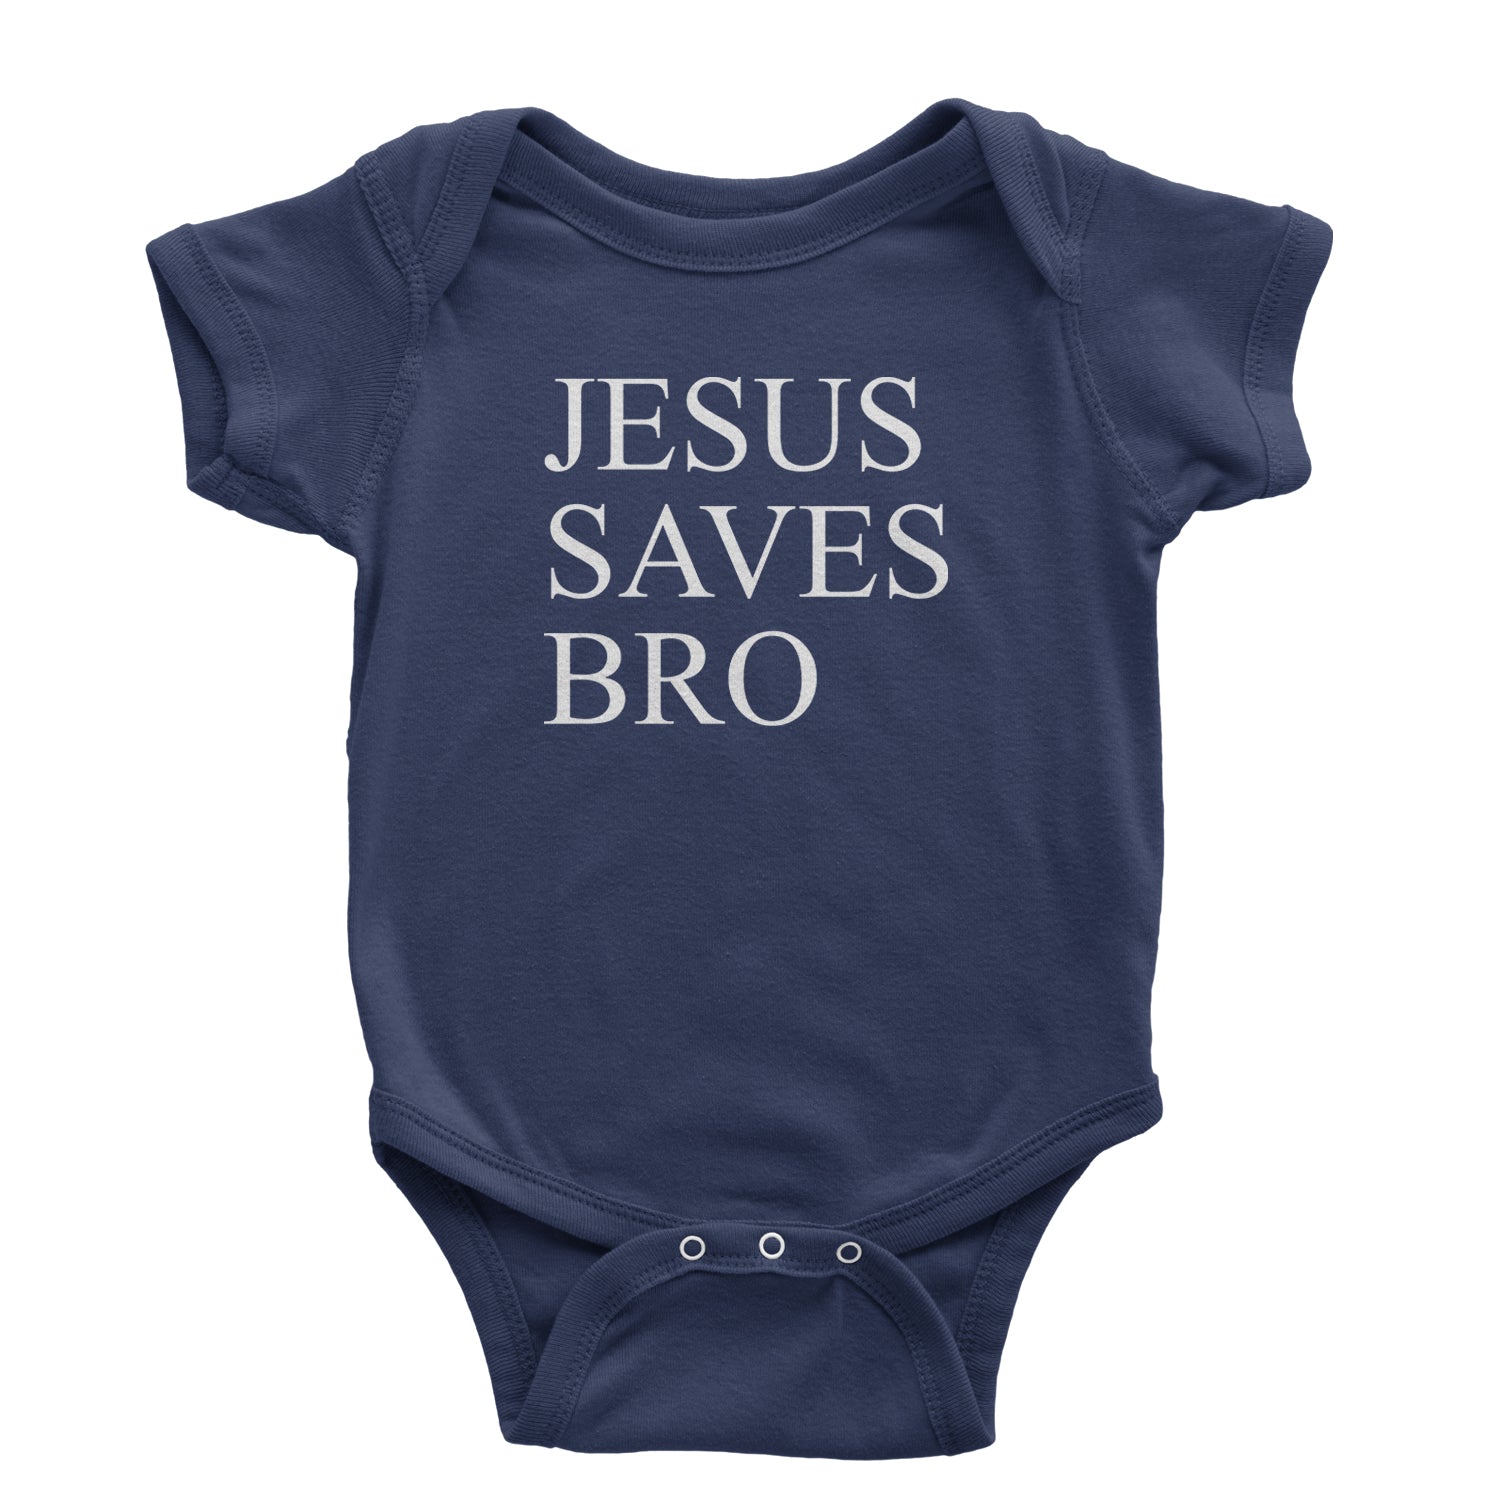 Jesus Saves Bro Infant One-Piece Romper Bodysuit and Toddler T-shirt catholic, christian, christianity, church, jesus, religion, religuous by Expression Tees